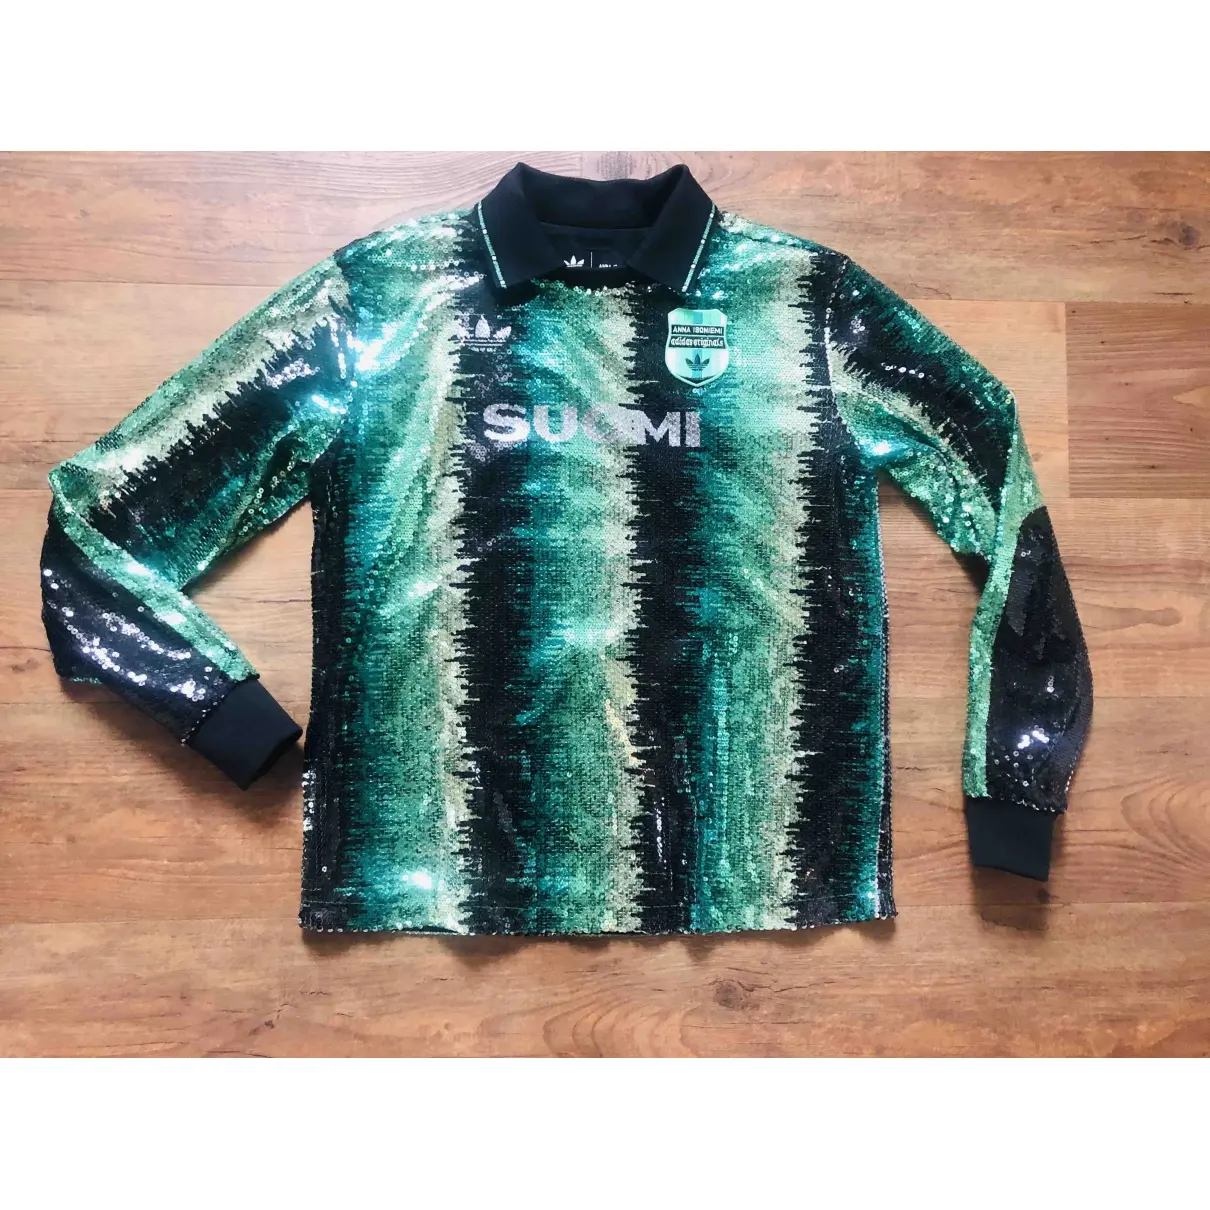 Adidas Glitter jersey top for sale